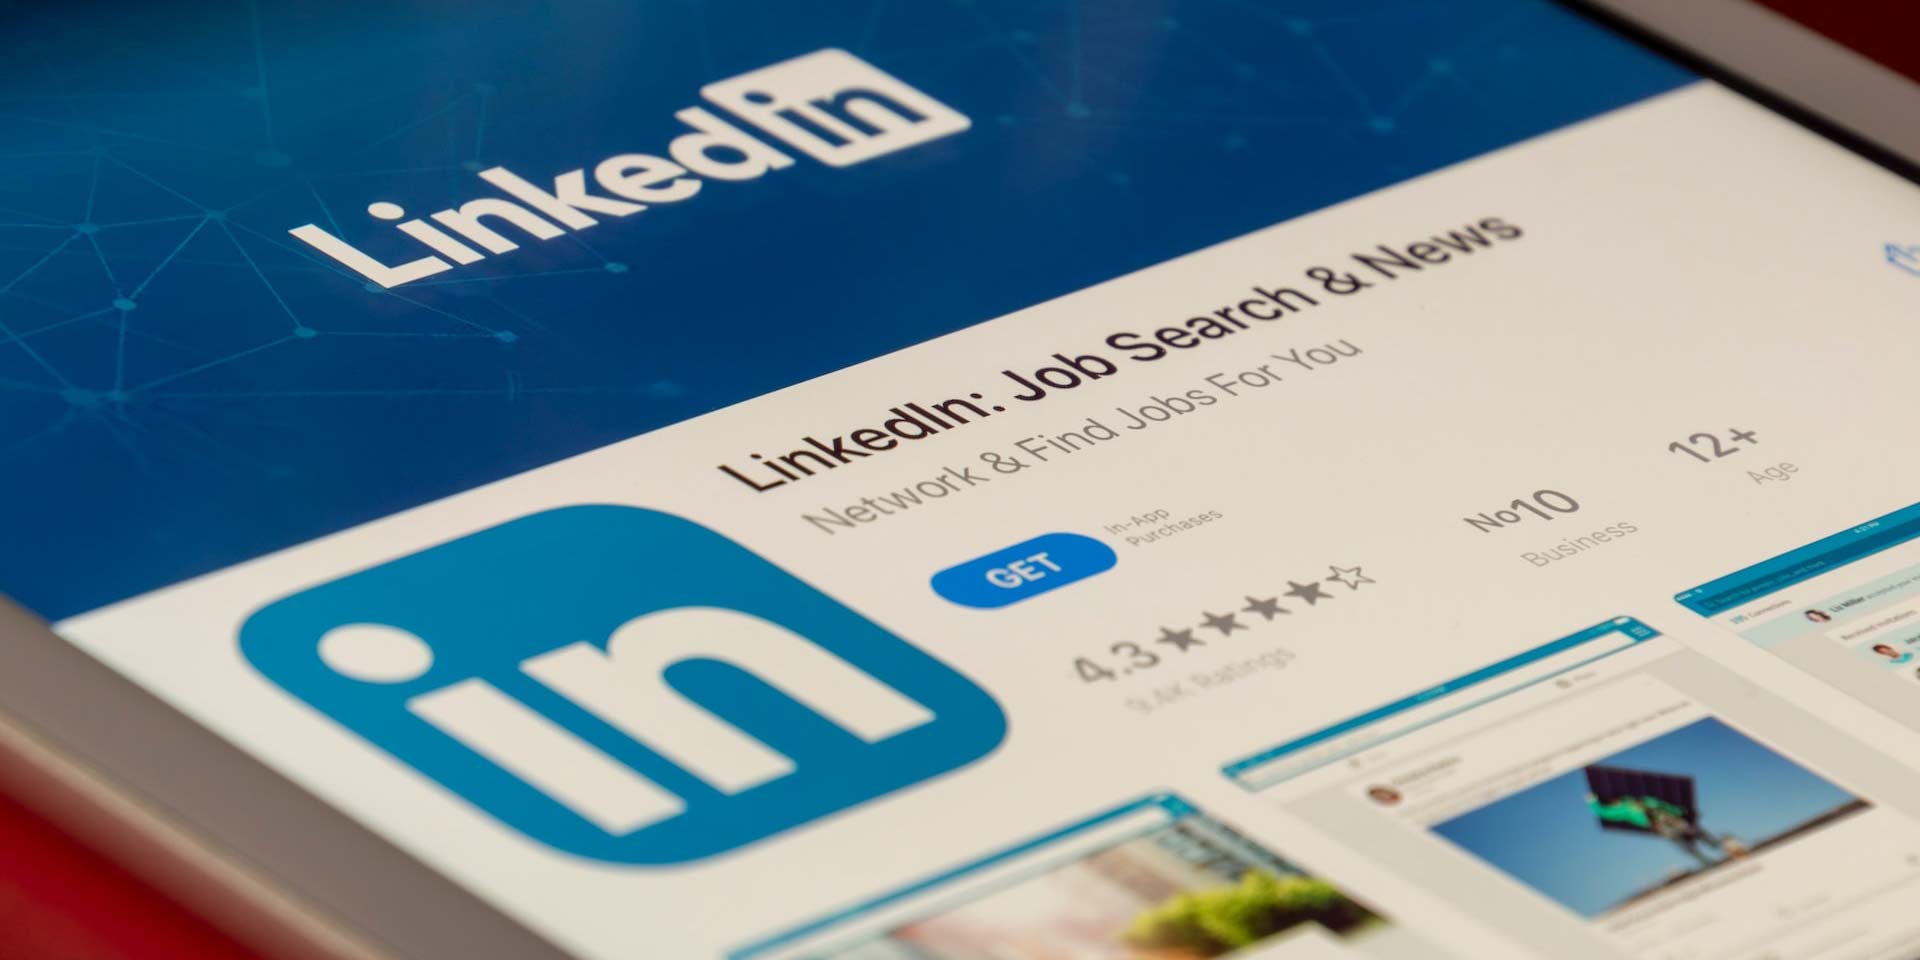 How to make the most of your LinkedIn profile